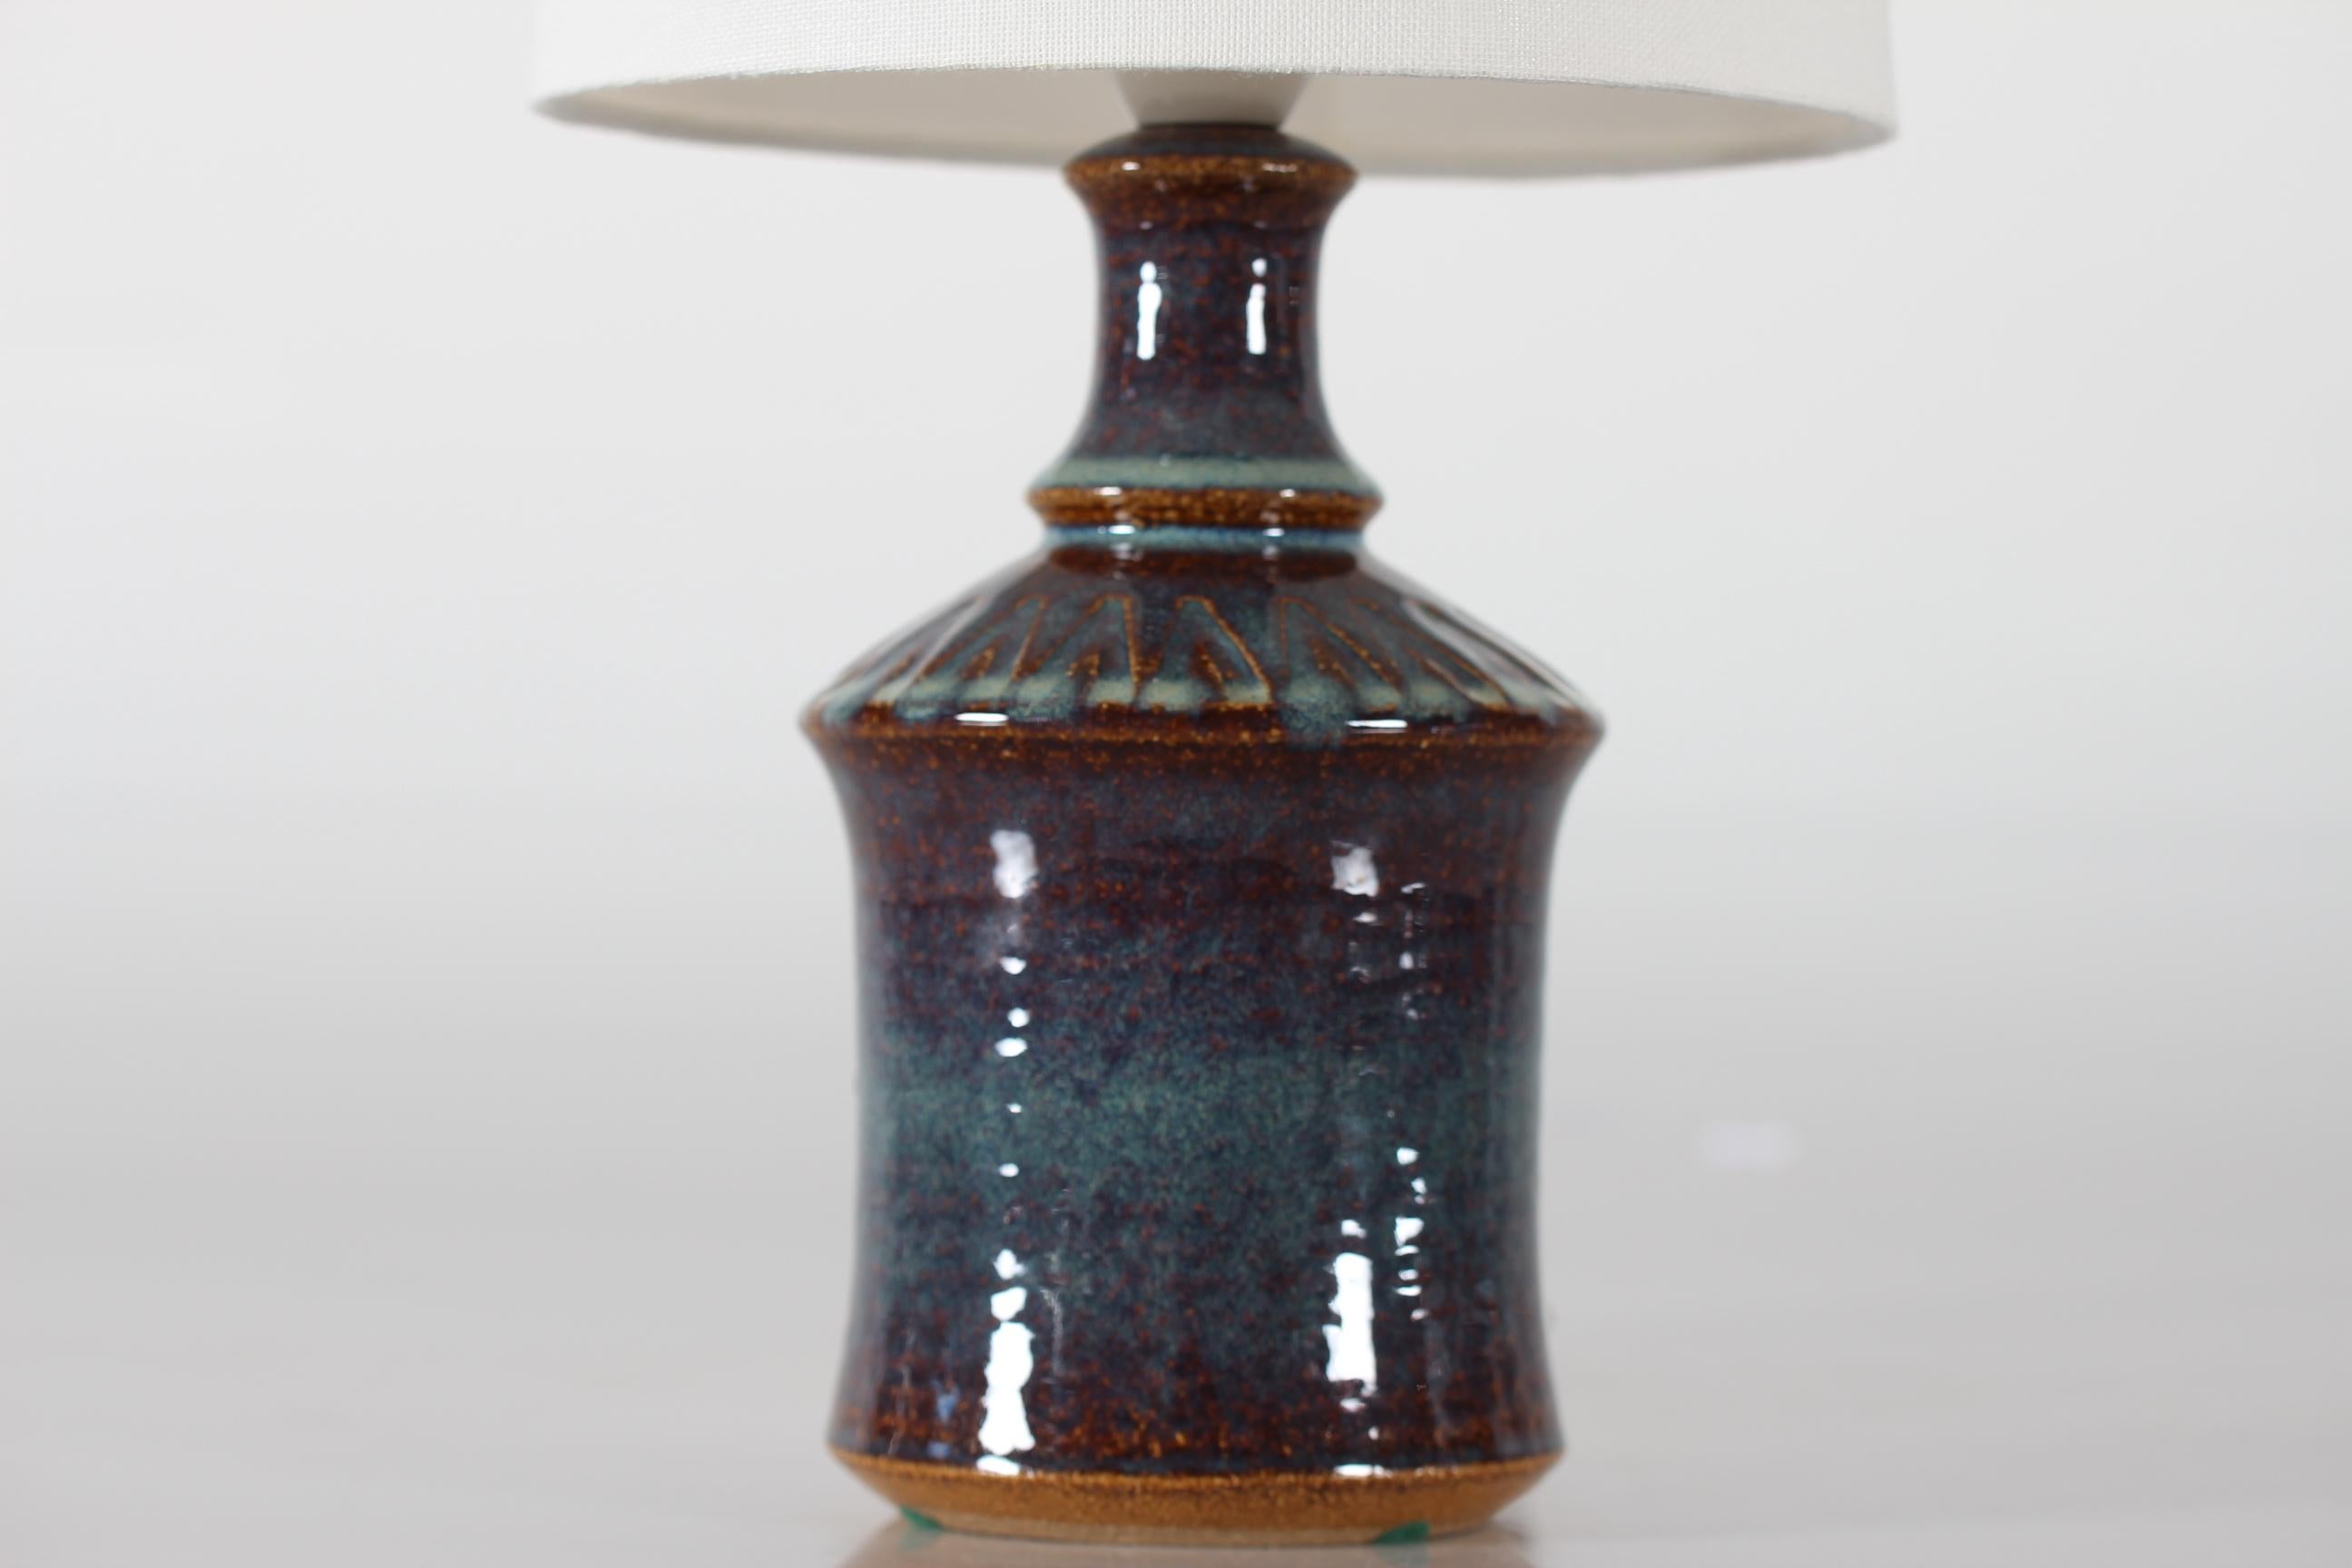 Small stoneware table lamp from Søholm Stentøj, Denmark, made circa 1960s. 
The lamp has a glossy glaze in shades of blue, turquoise and brown over the incised geometric pattern at the upper part of the lamp foot.

Included are new clip on bulb